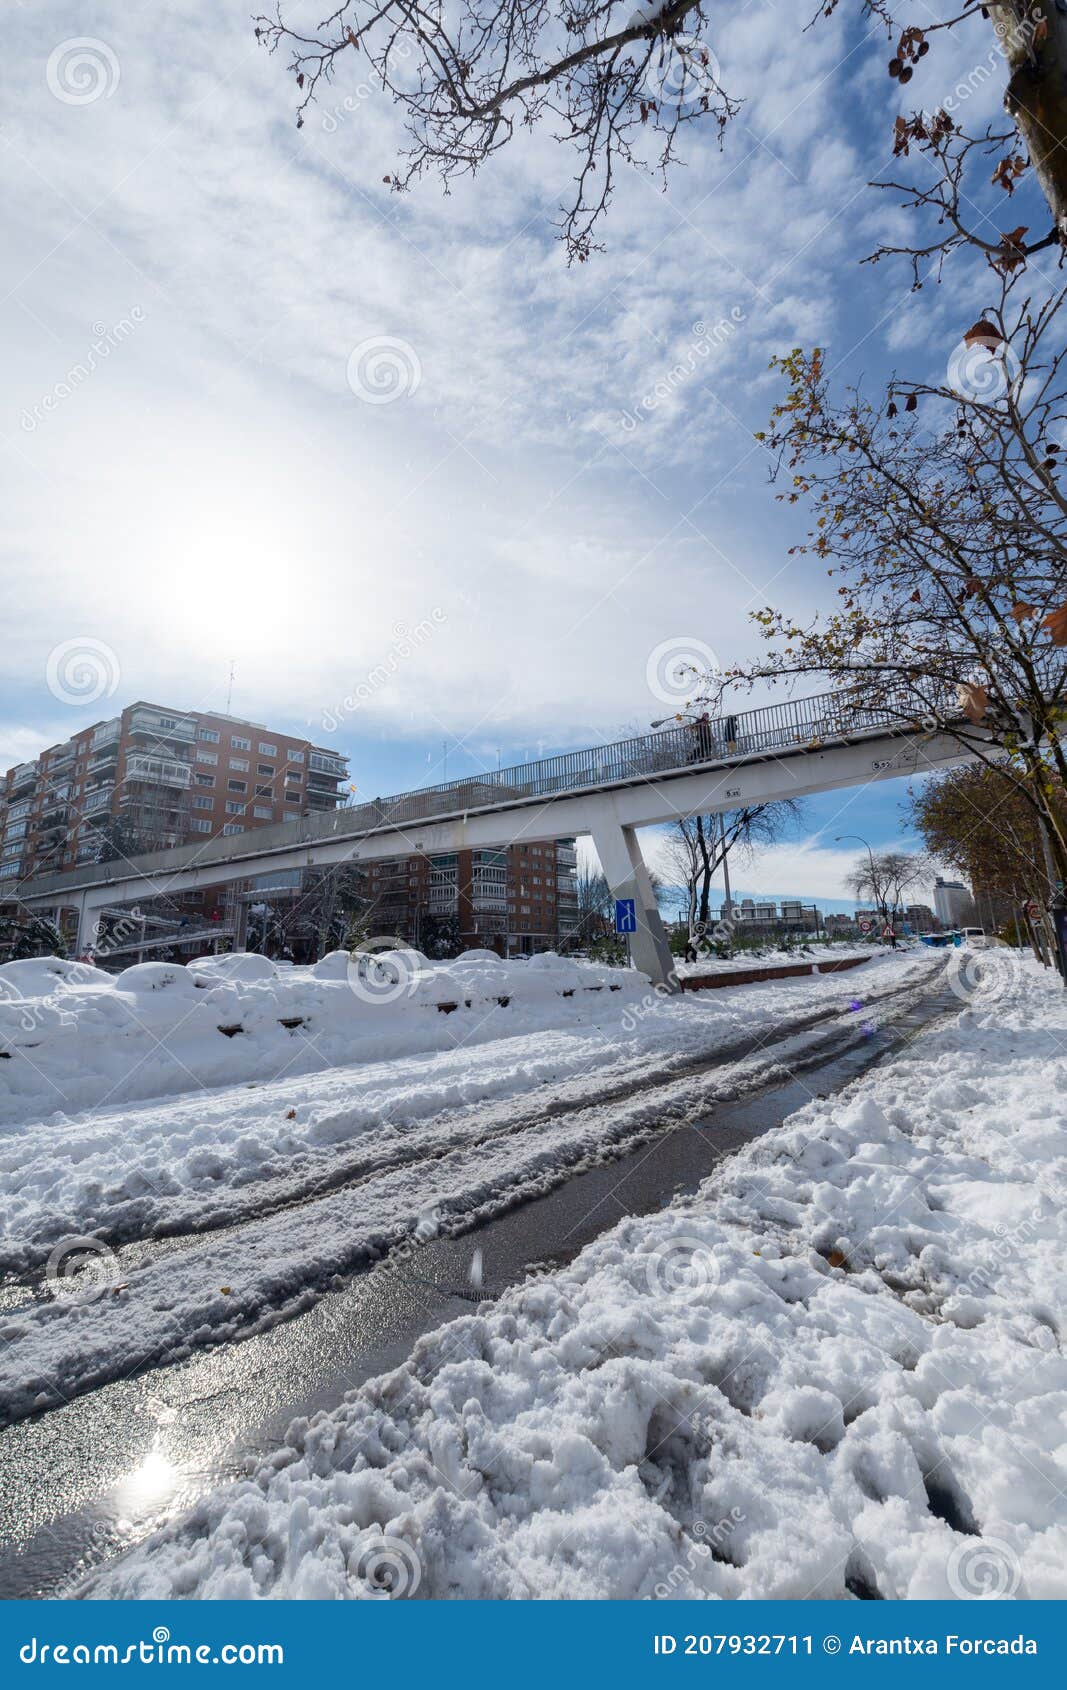 angular view of an a2 highway bridge with snow, a sunny day, madrid, spain, europe, january 10, 2021,